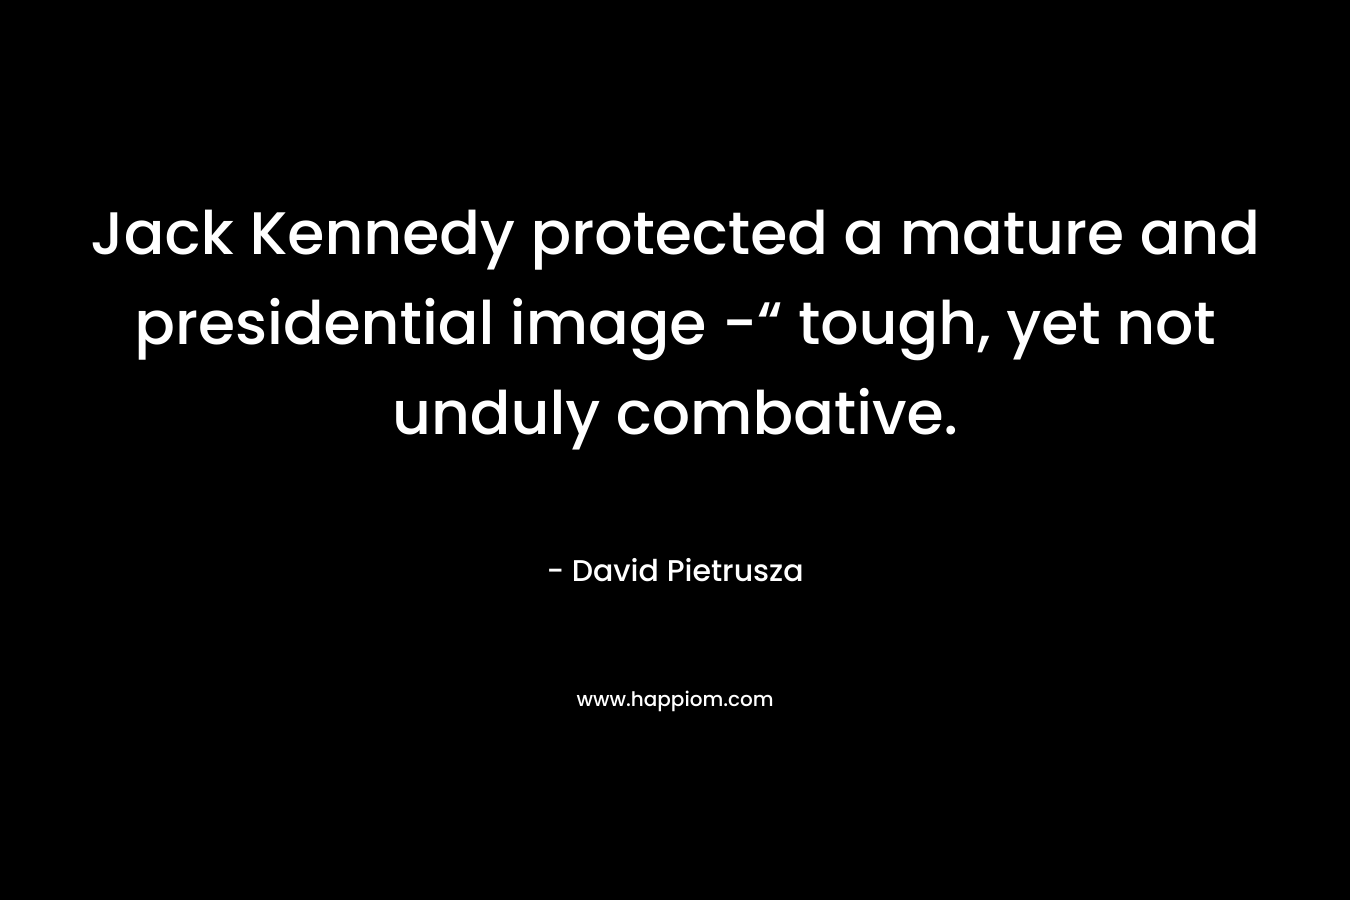 Jack Kennedy protected a mature and presidential image -“ tough, yet not unduly combative.